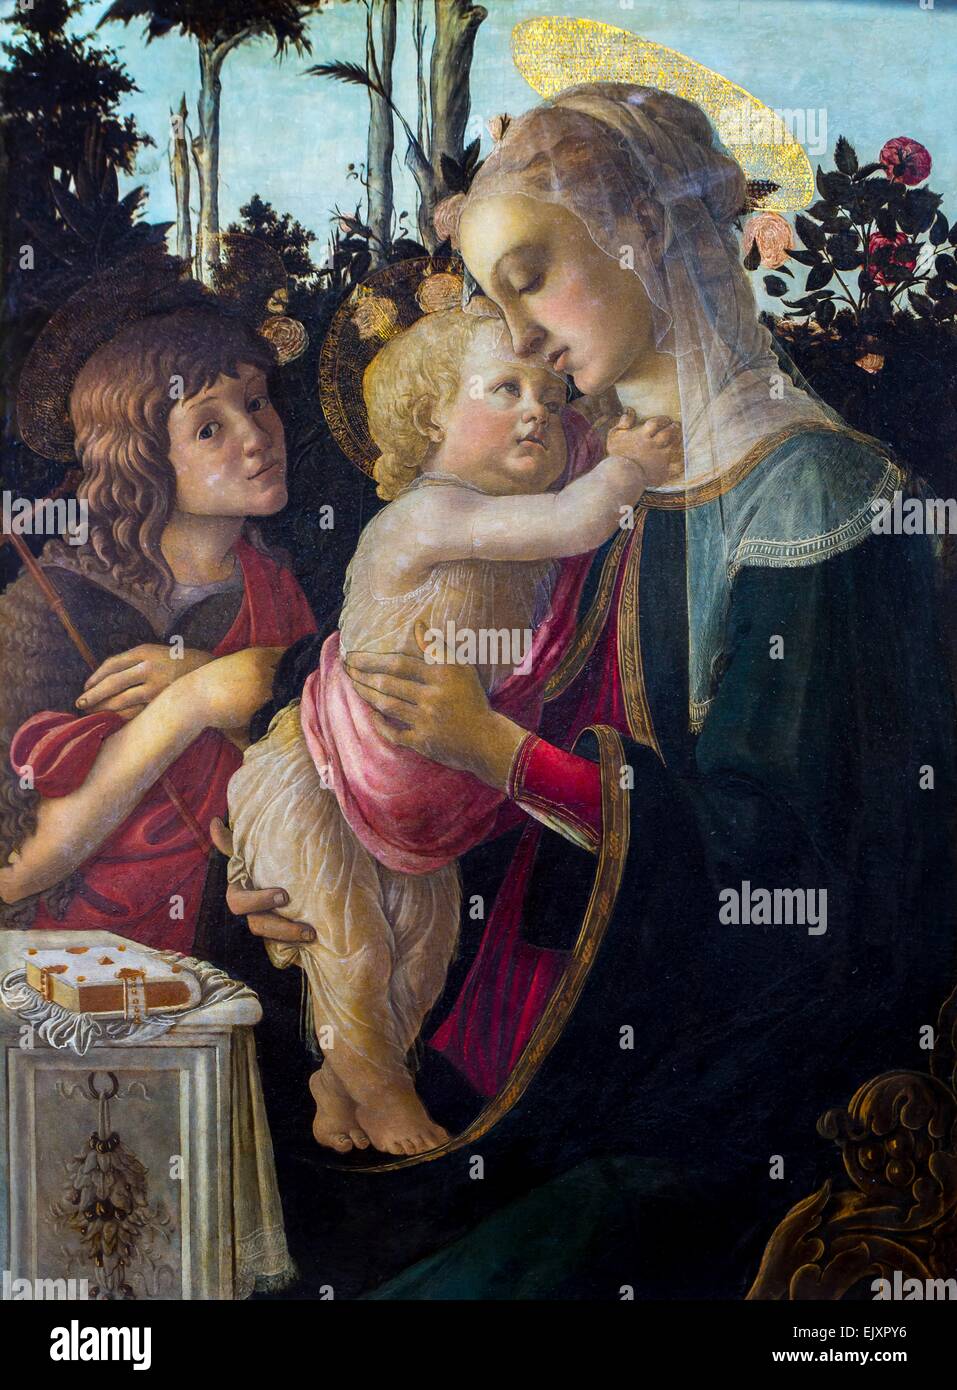 ActiveMuseum 0001987.jpg / Virgin and Child, with young Saint John the Baptist, ca 1470 - Alessandro Filipepi, aka Botticelli 26/09/2013  -   / Antiquity Collection / Active Museum Stock Photo